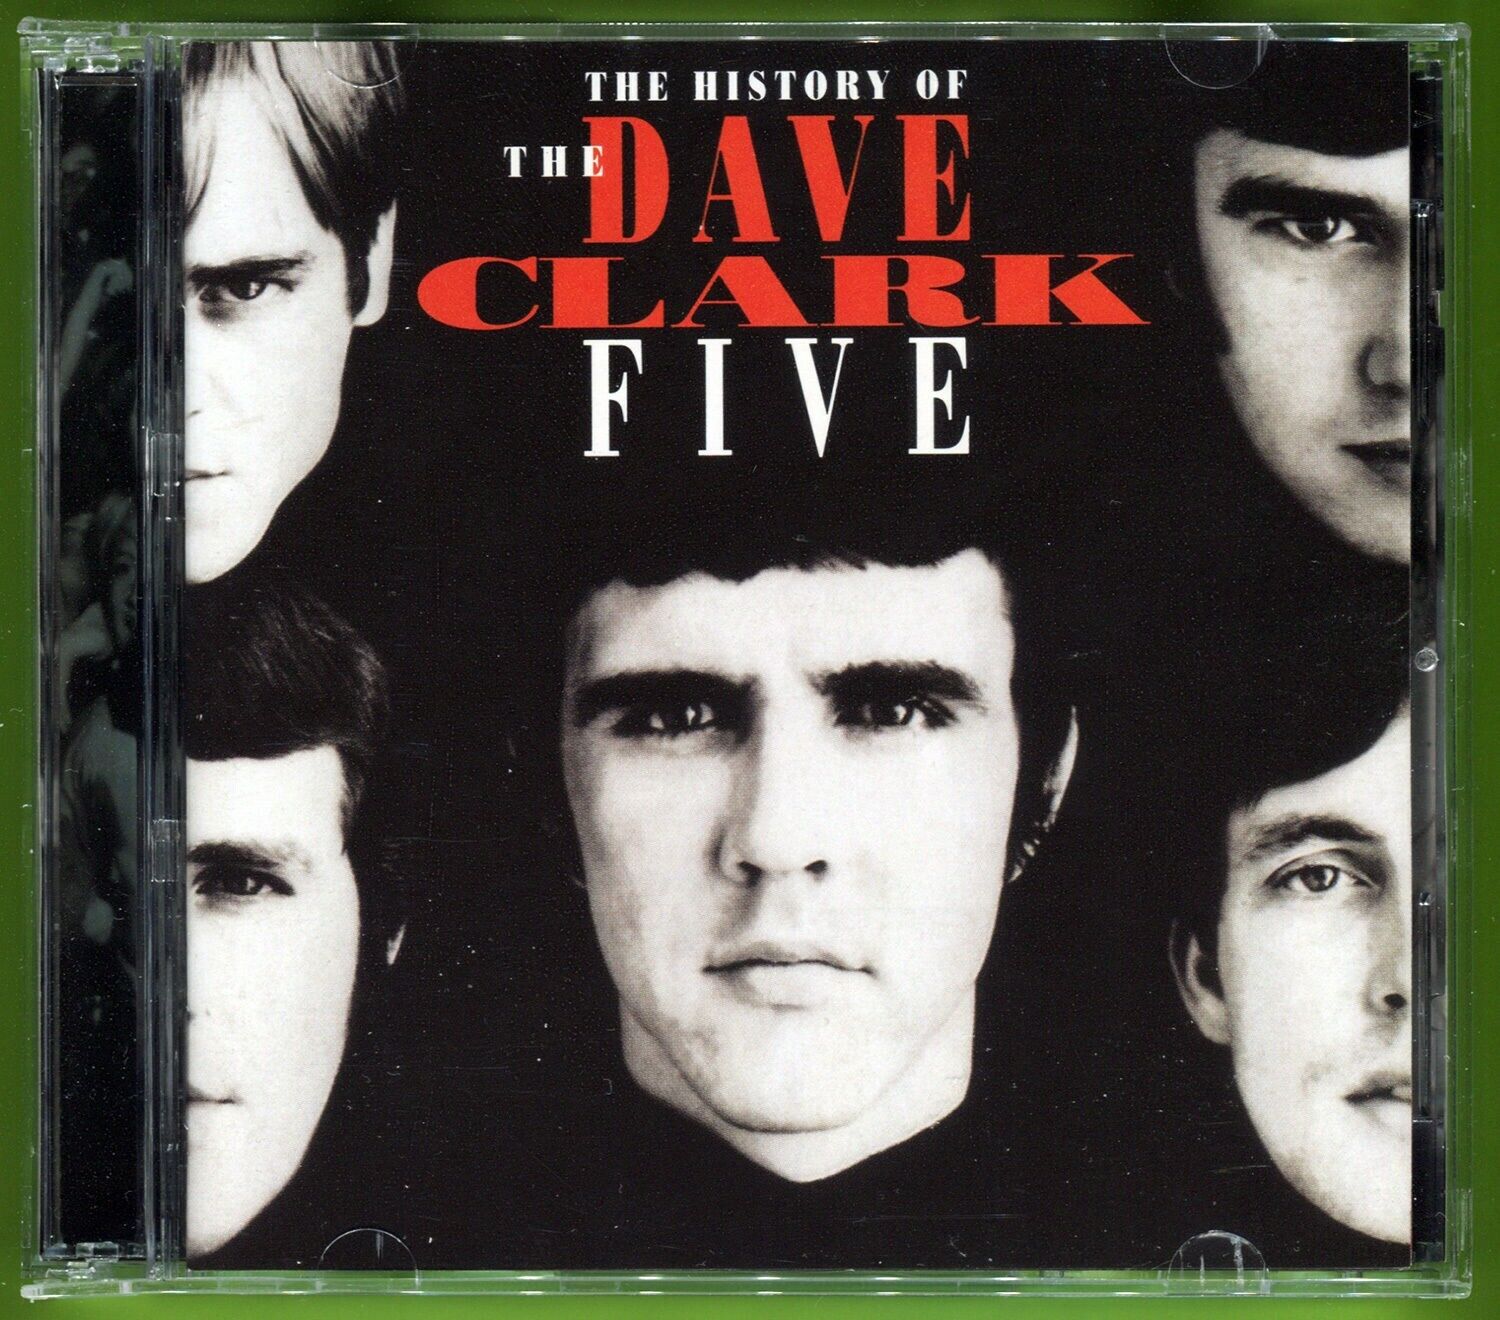 THE HISTORY OF DAVE CLARK FIVE 2 CD  50 Tracks Jewel Case +36 Page Booklet